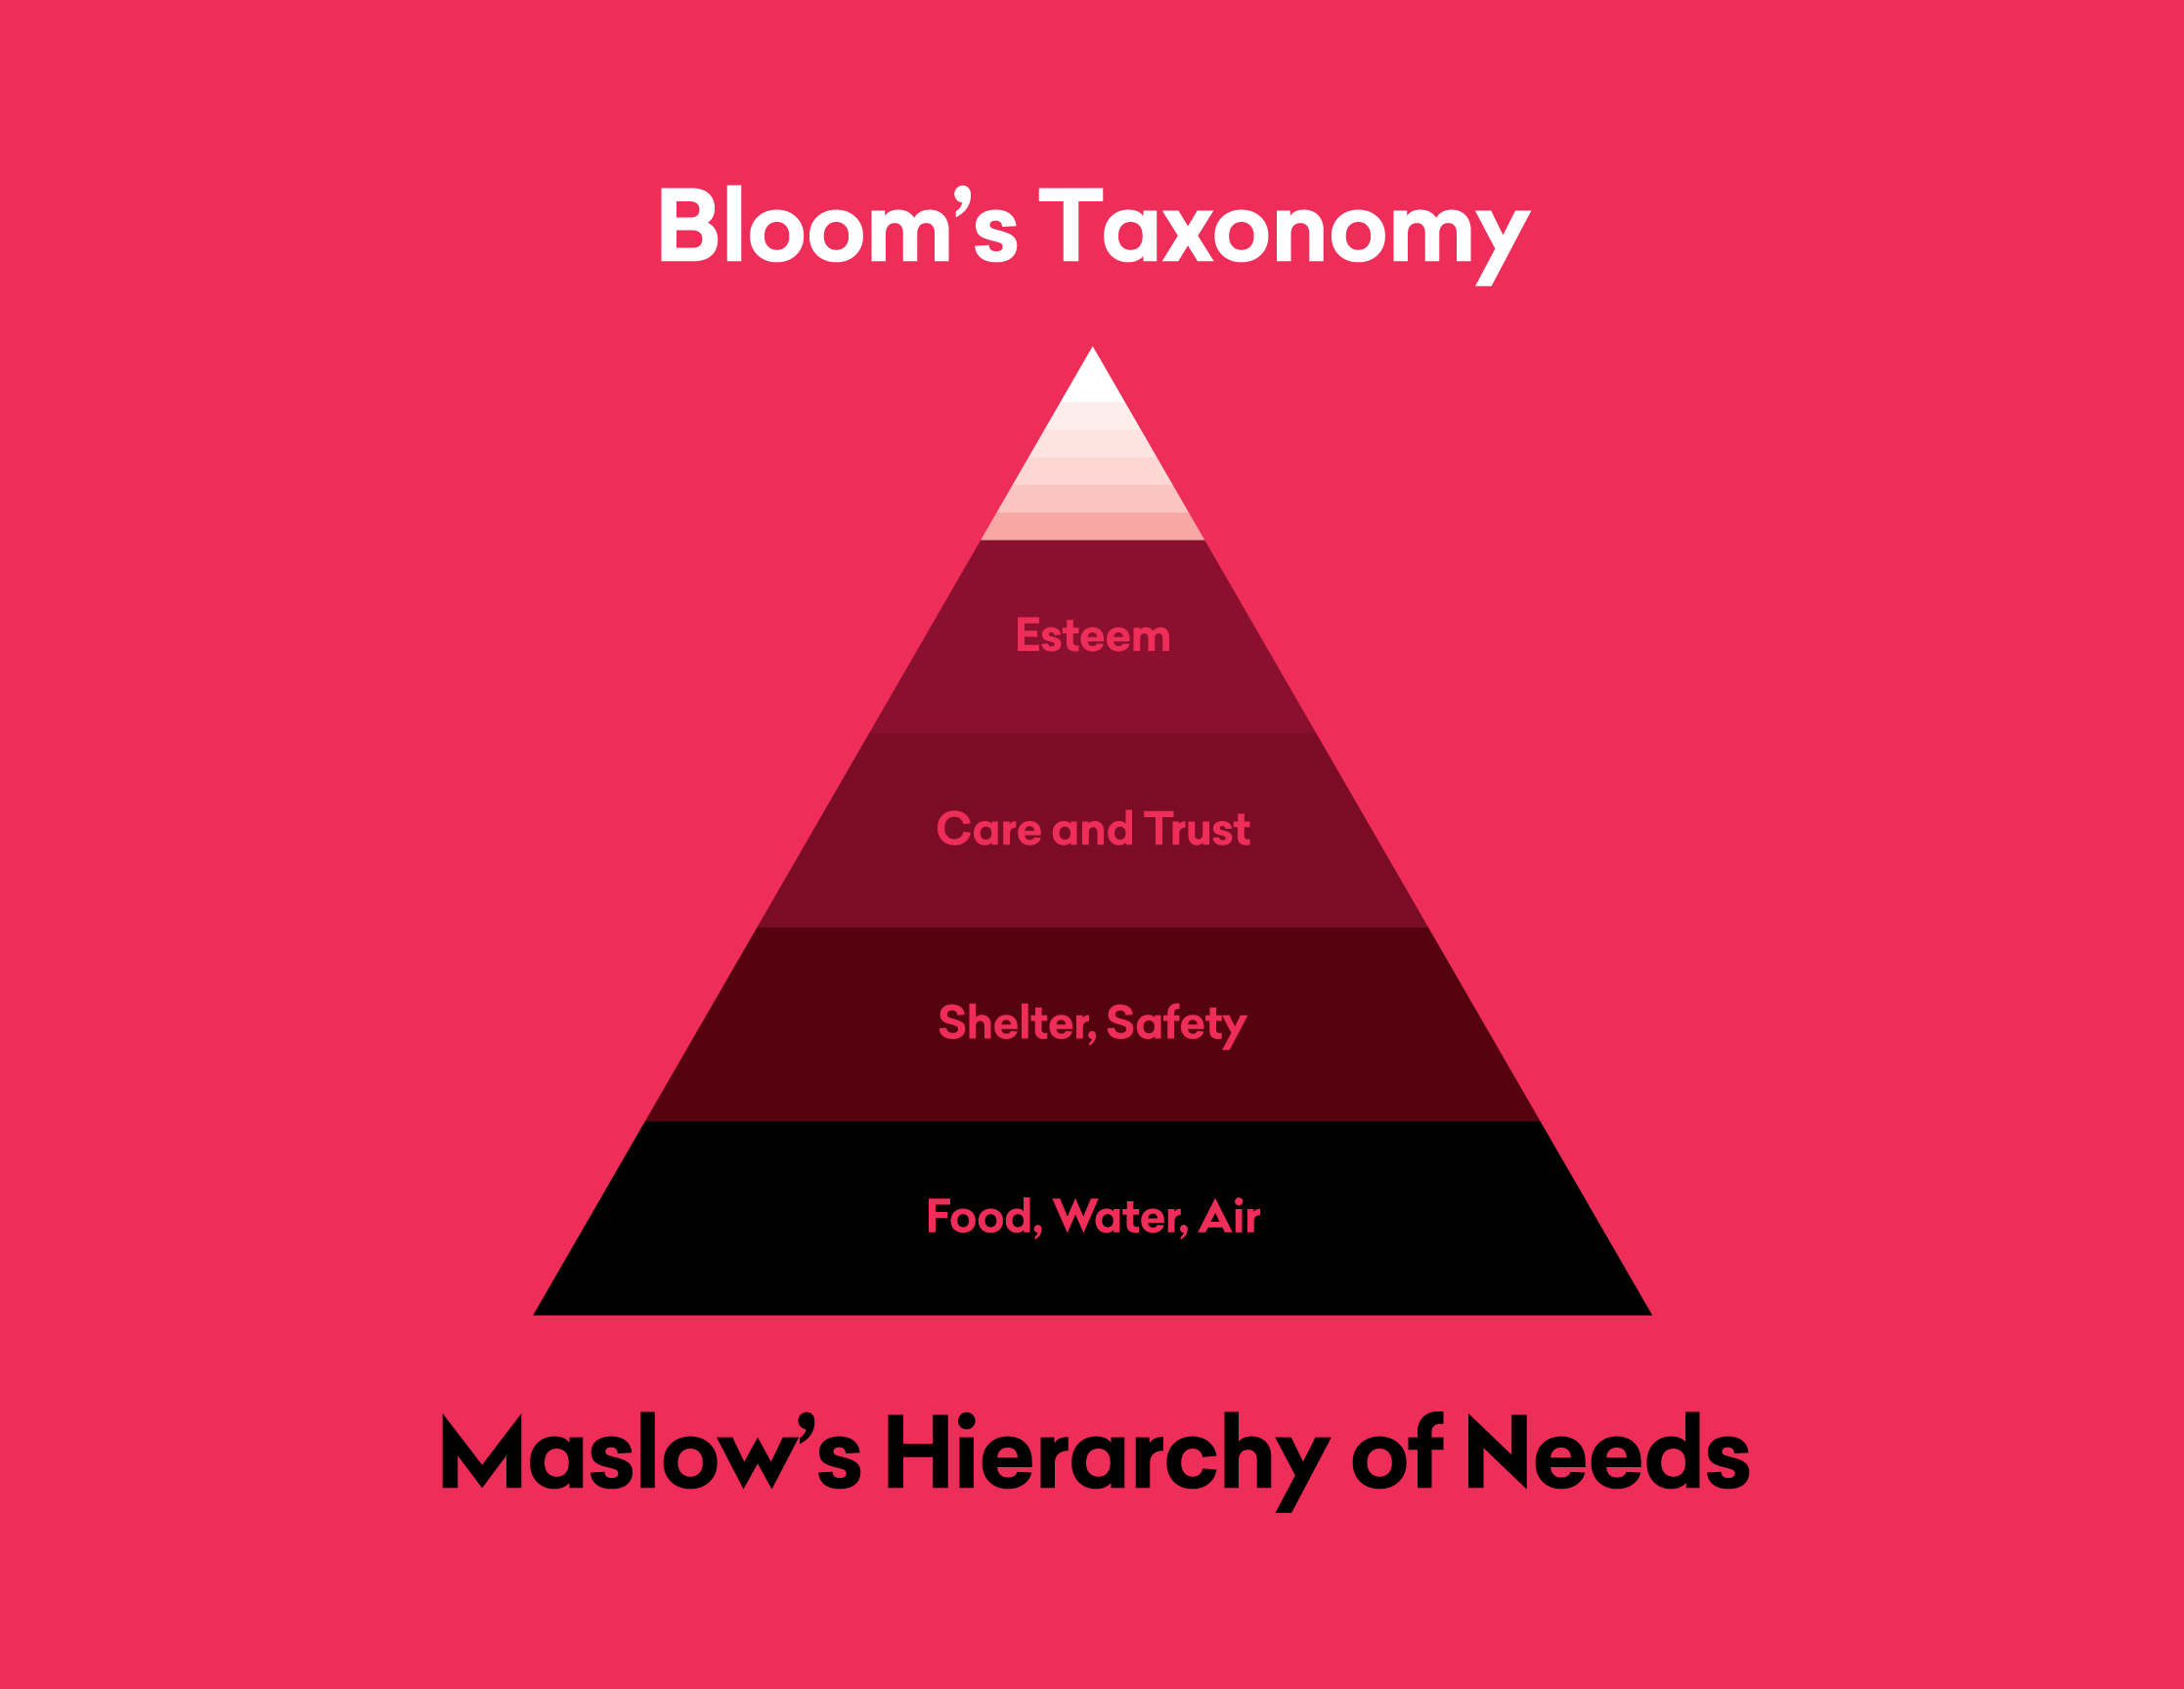 Bloom's Taxonomy and Maslow's Hierarchy of Needs